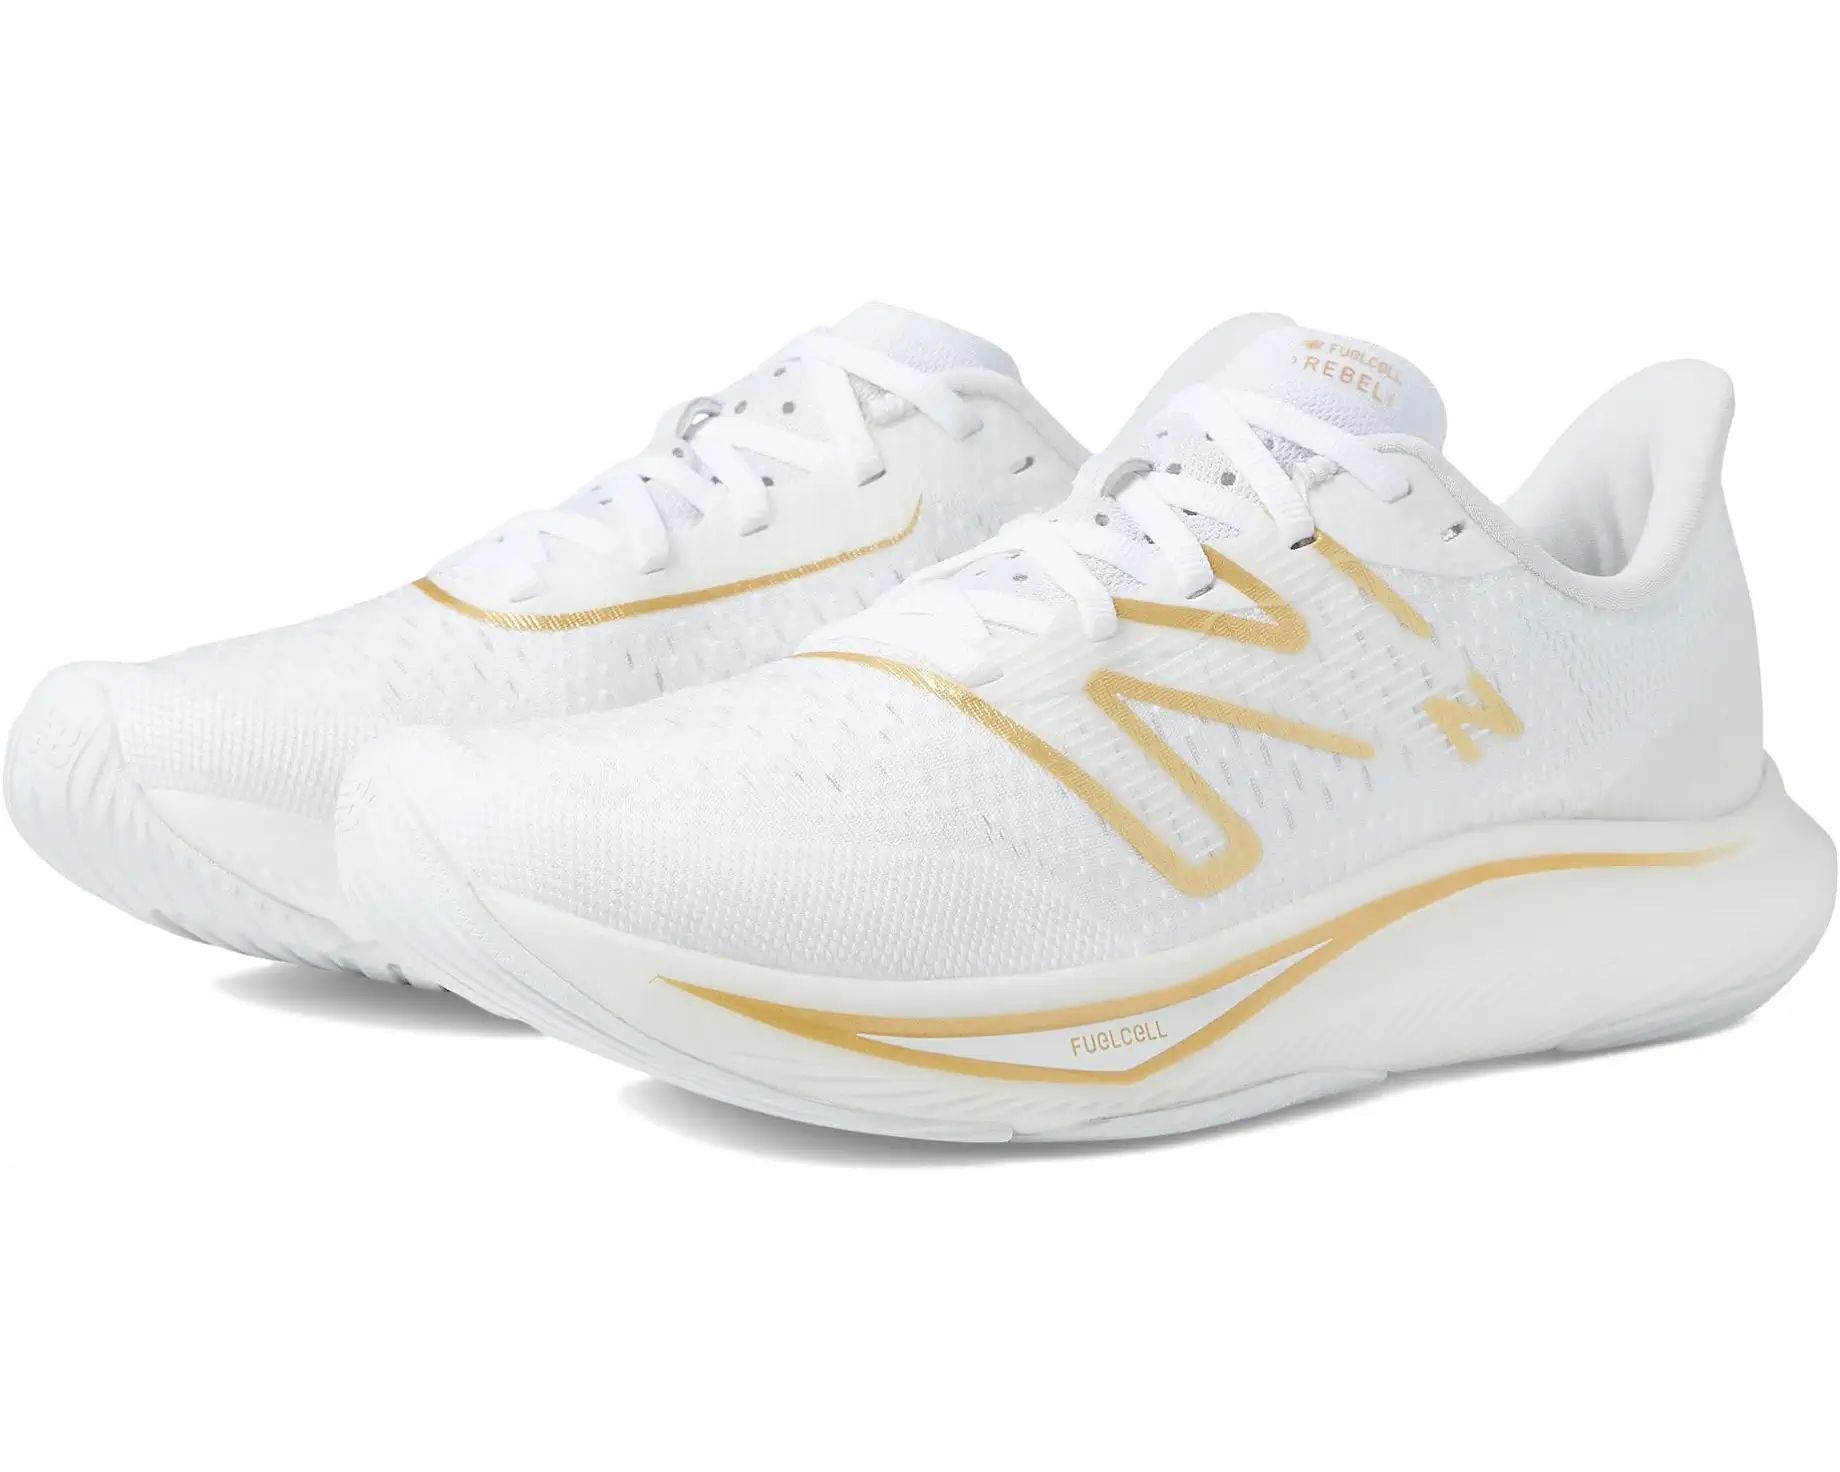 New Balance FuelCell Rebel v3 | Zappos